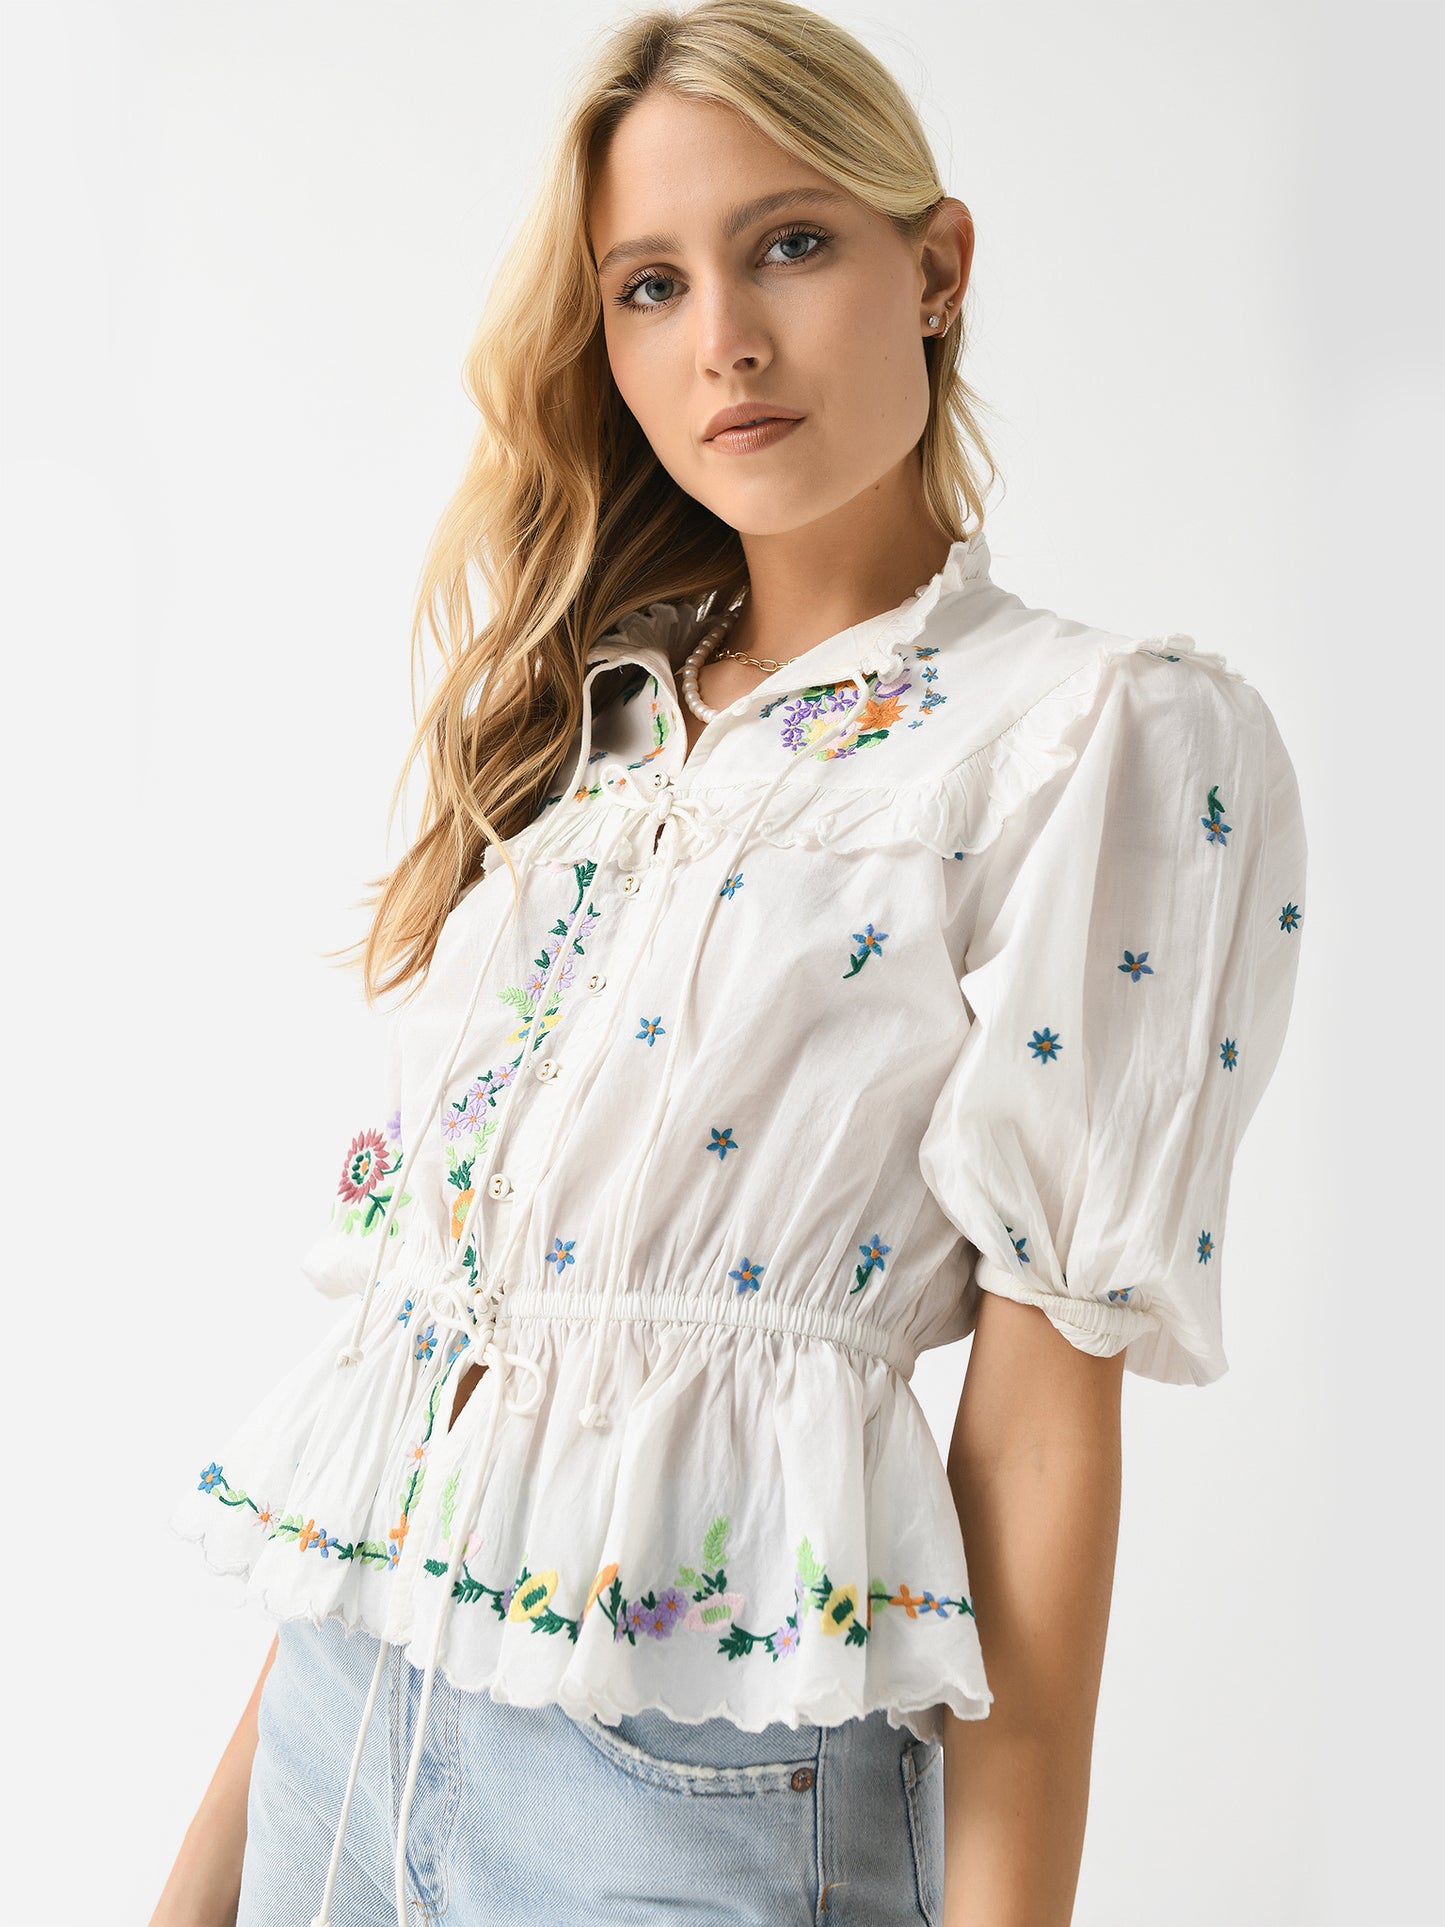 Alemais Women's Willa Embroidered Blouse